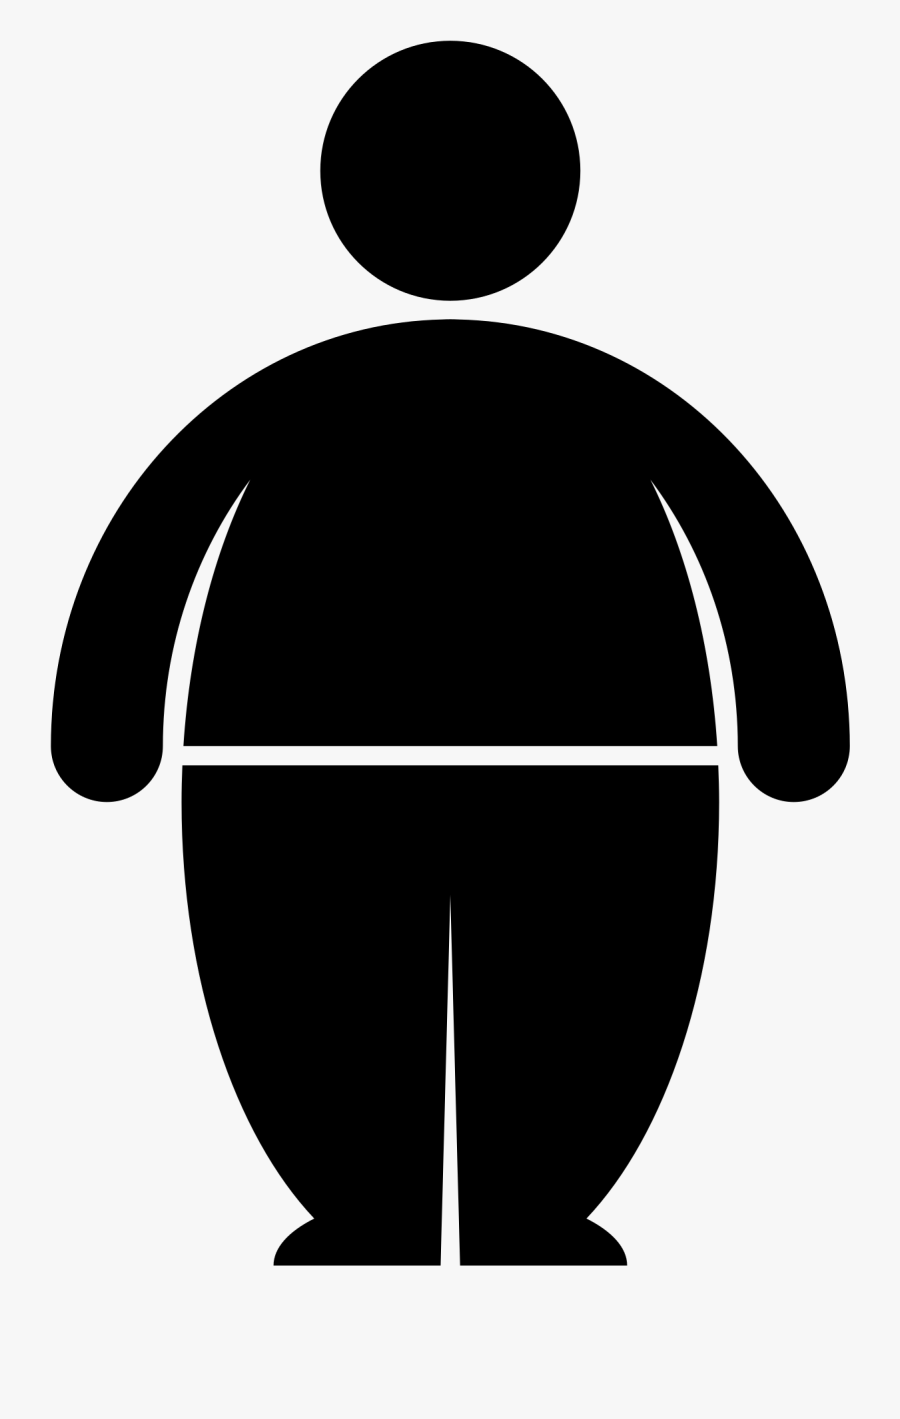 #lipiddisorders Hashtag On Twitter - Obesity Clipart, Transparent Clipart